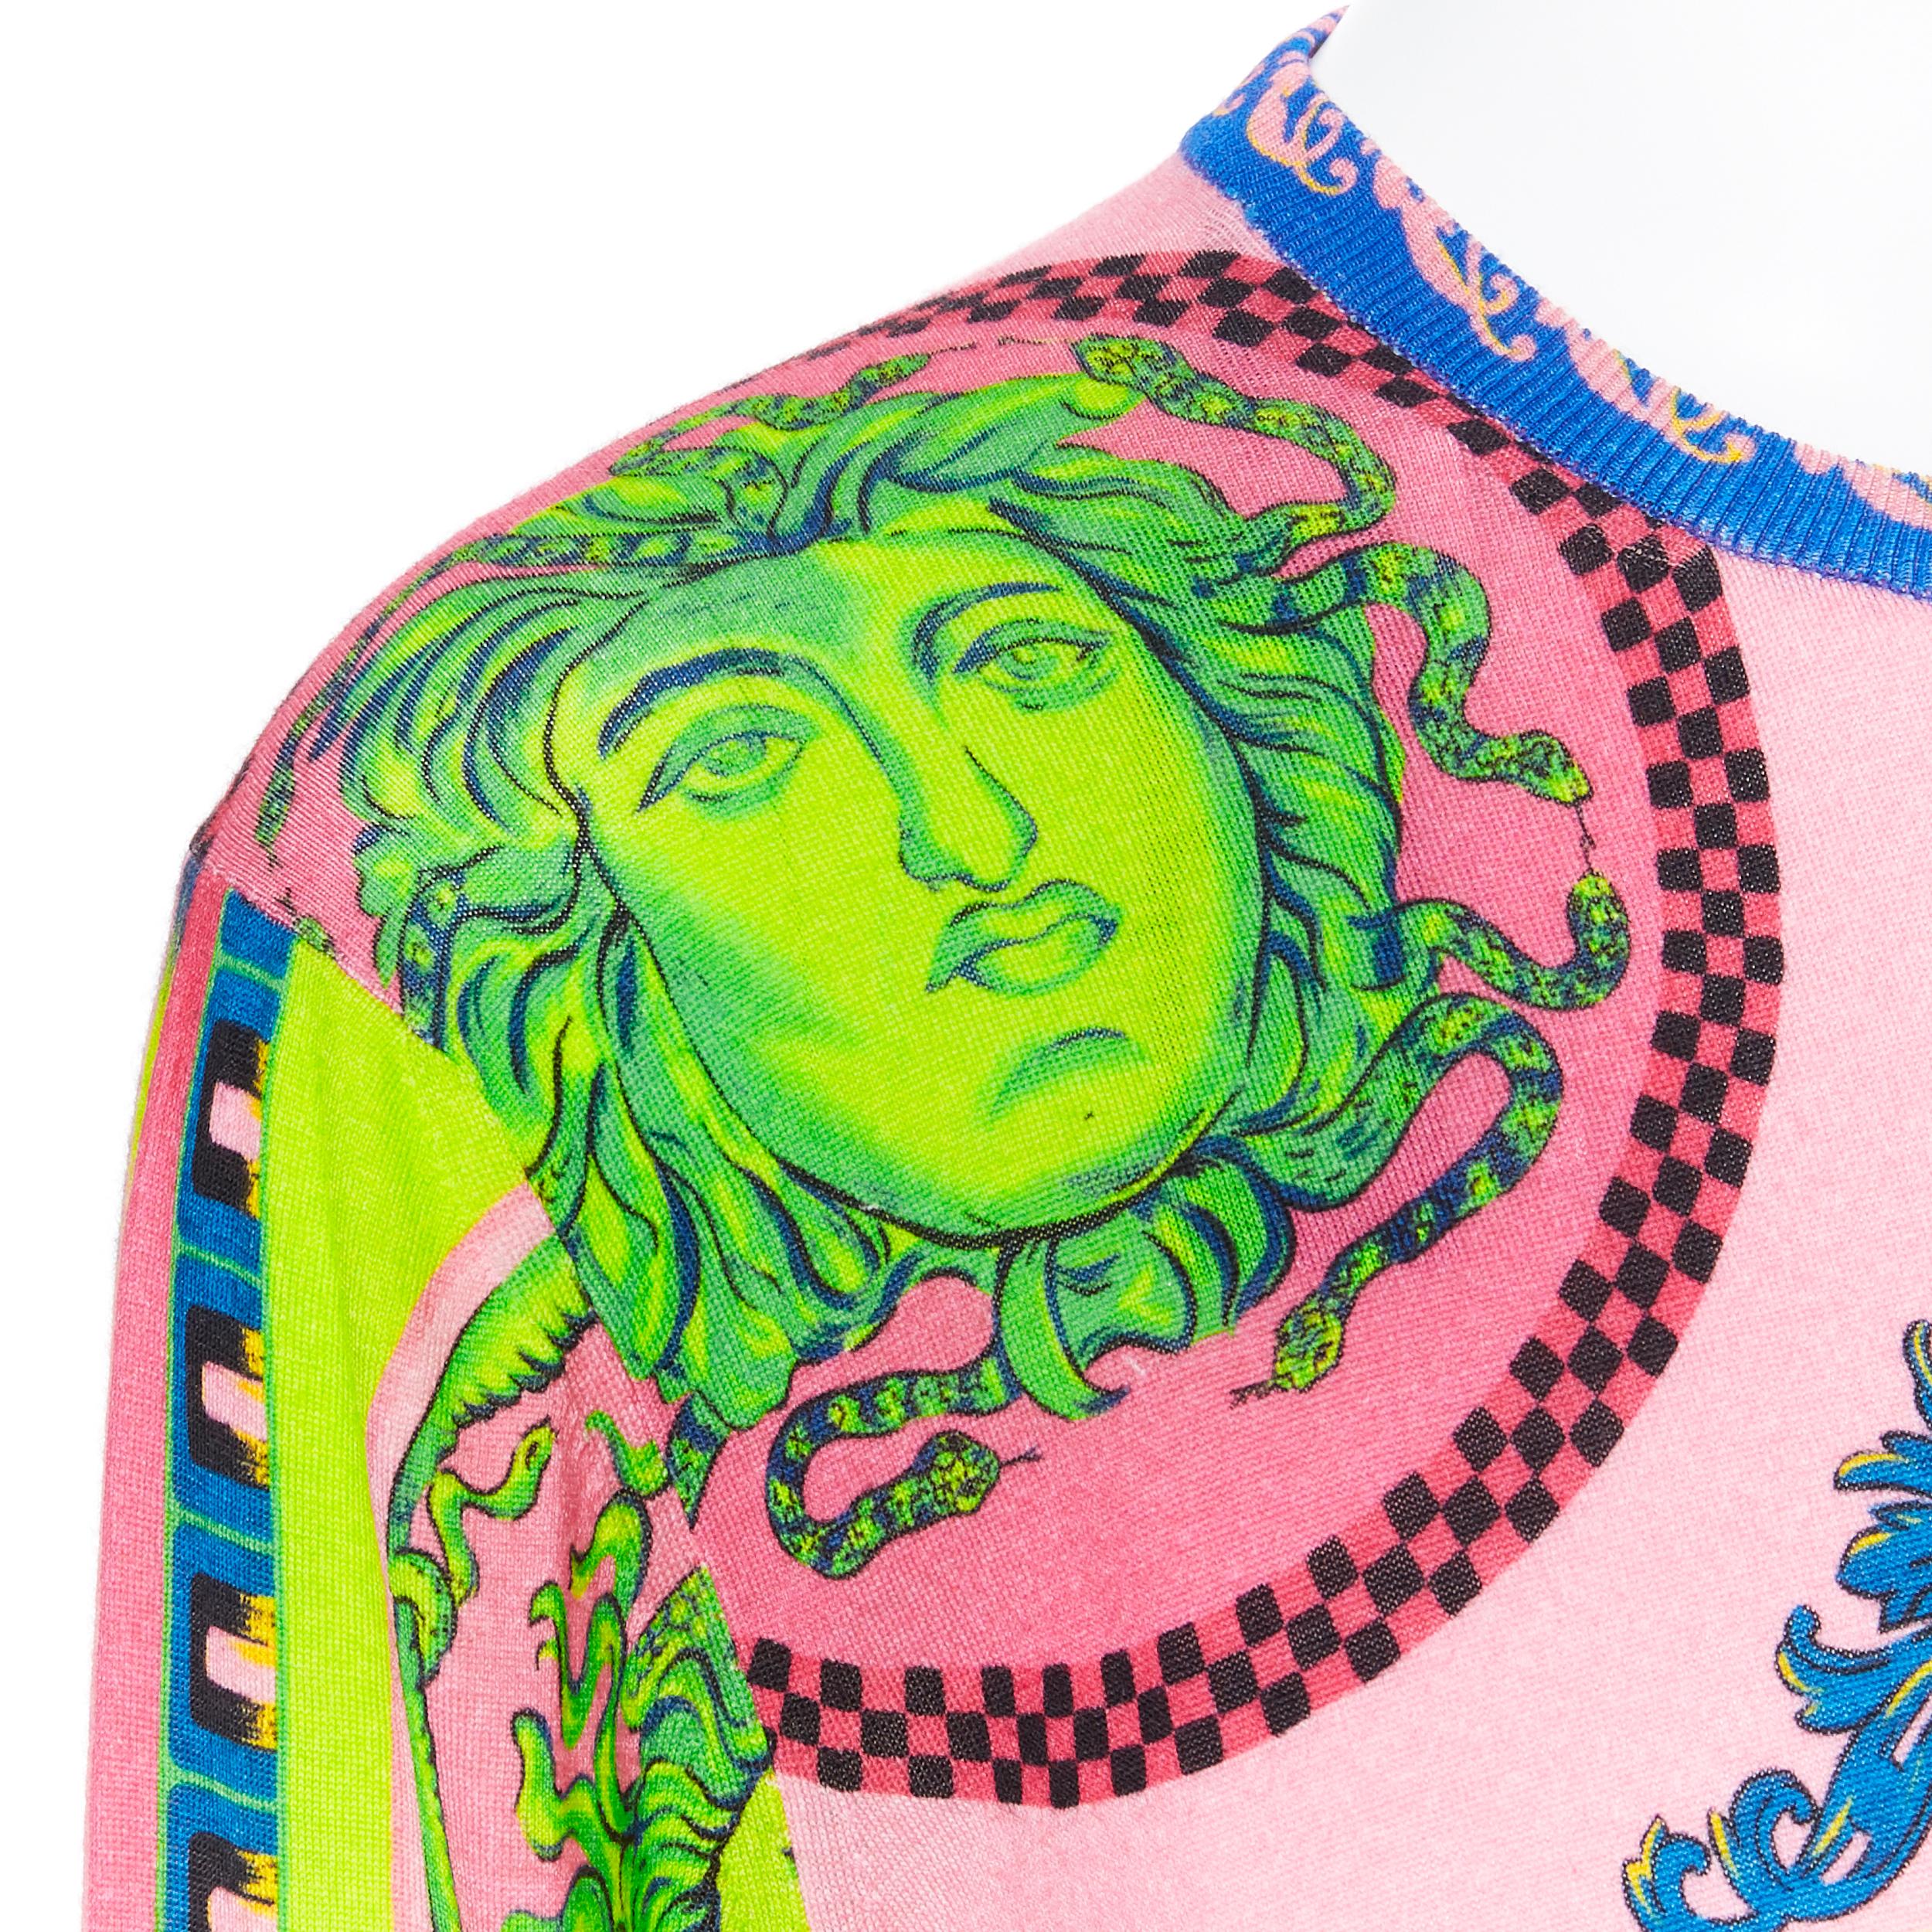 new VERSACE 100% wool Pop Foulard neon Medusa graphic print knitted sweater XXL
Brand: Versace
Designer: Donatella Versace
Collection: Pre-fall 2018
Model Name / Style: Wool sweater
Material: Wool
Color: Multicolour
Pattern: Other; neon Medusa